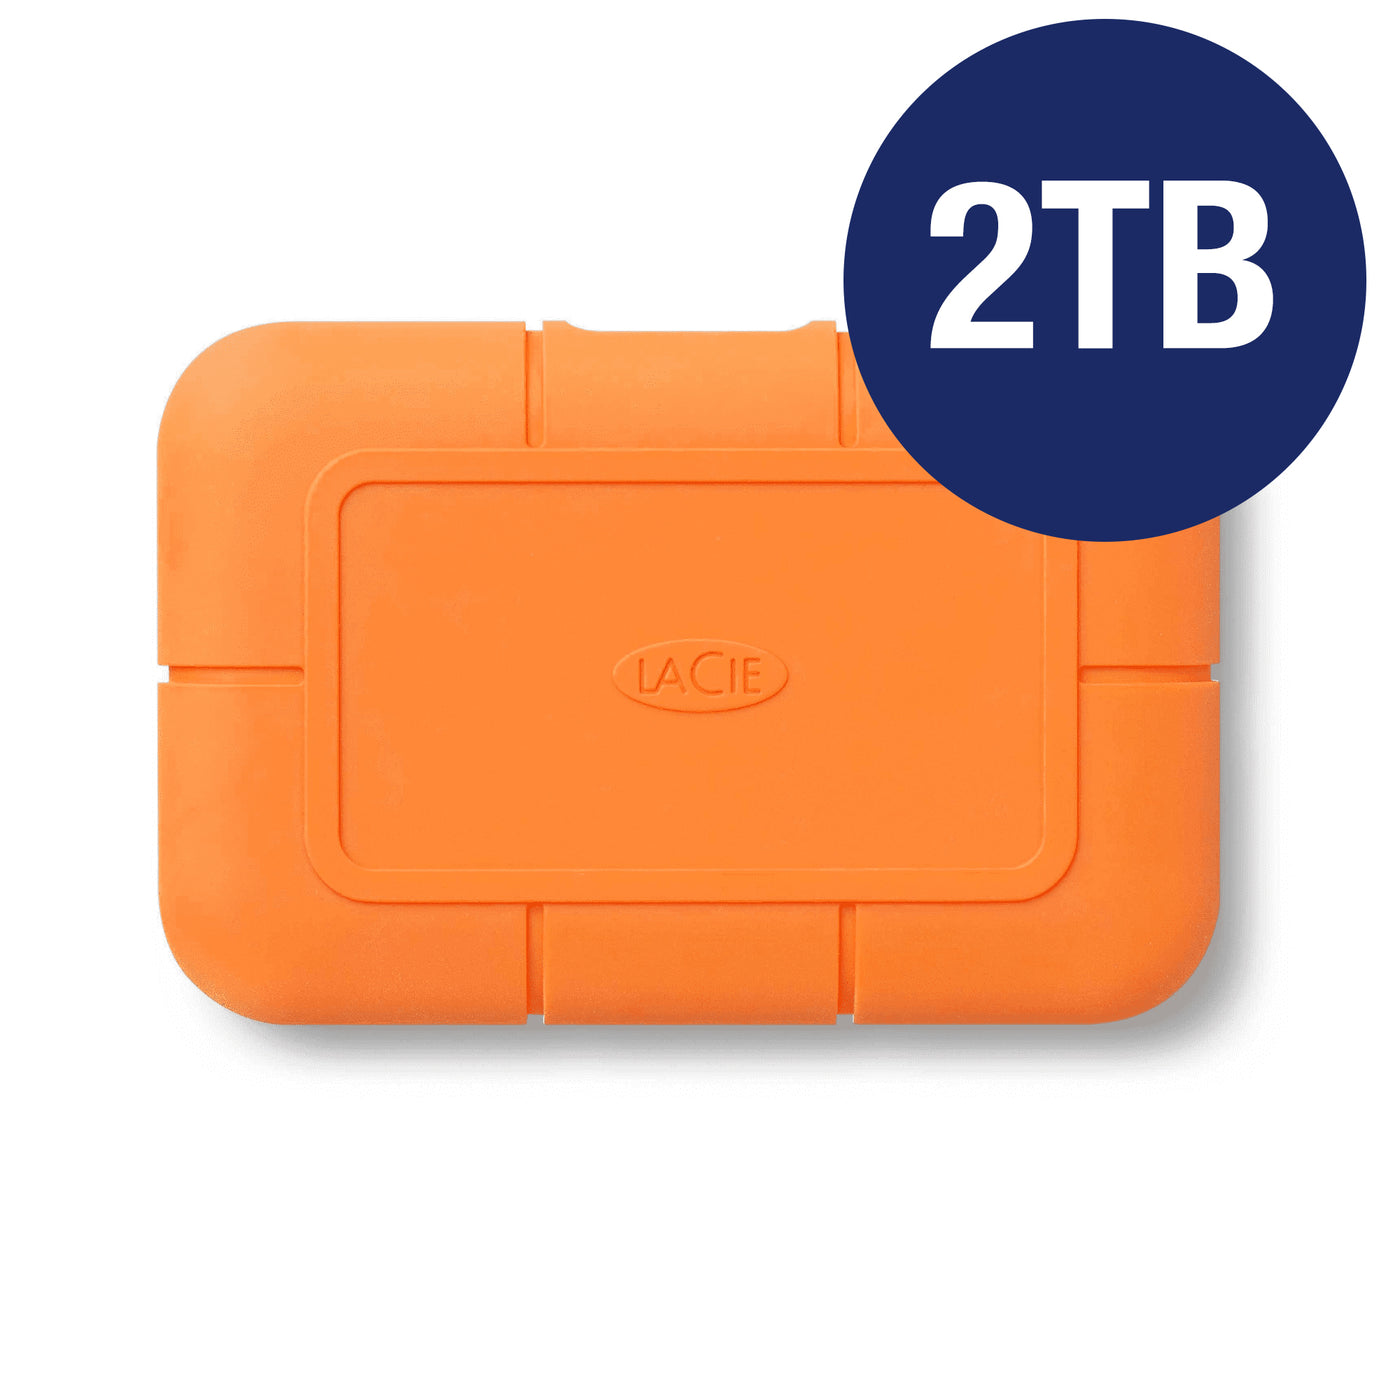 LaCie Rugged SSD USB-C with Rescue 2TB